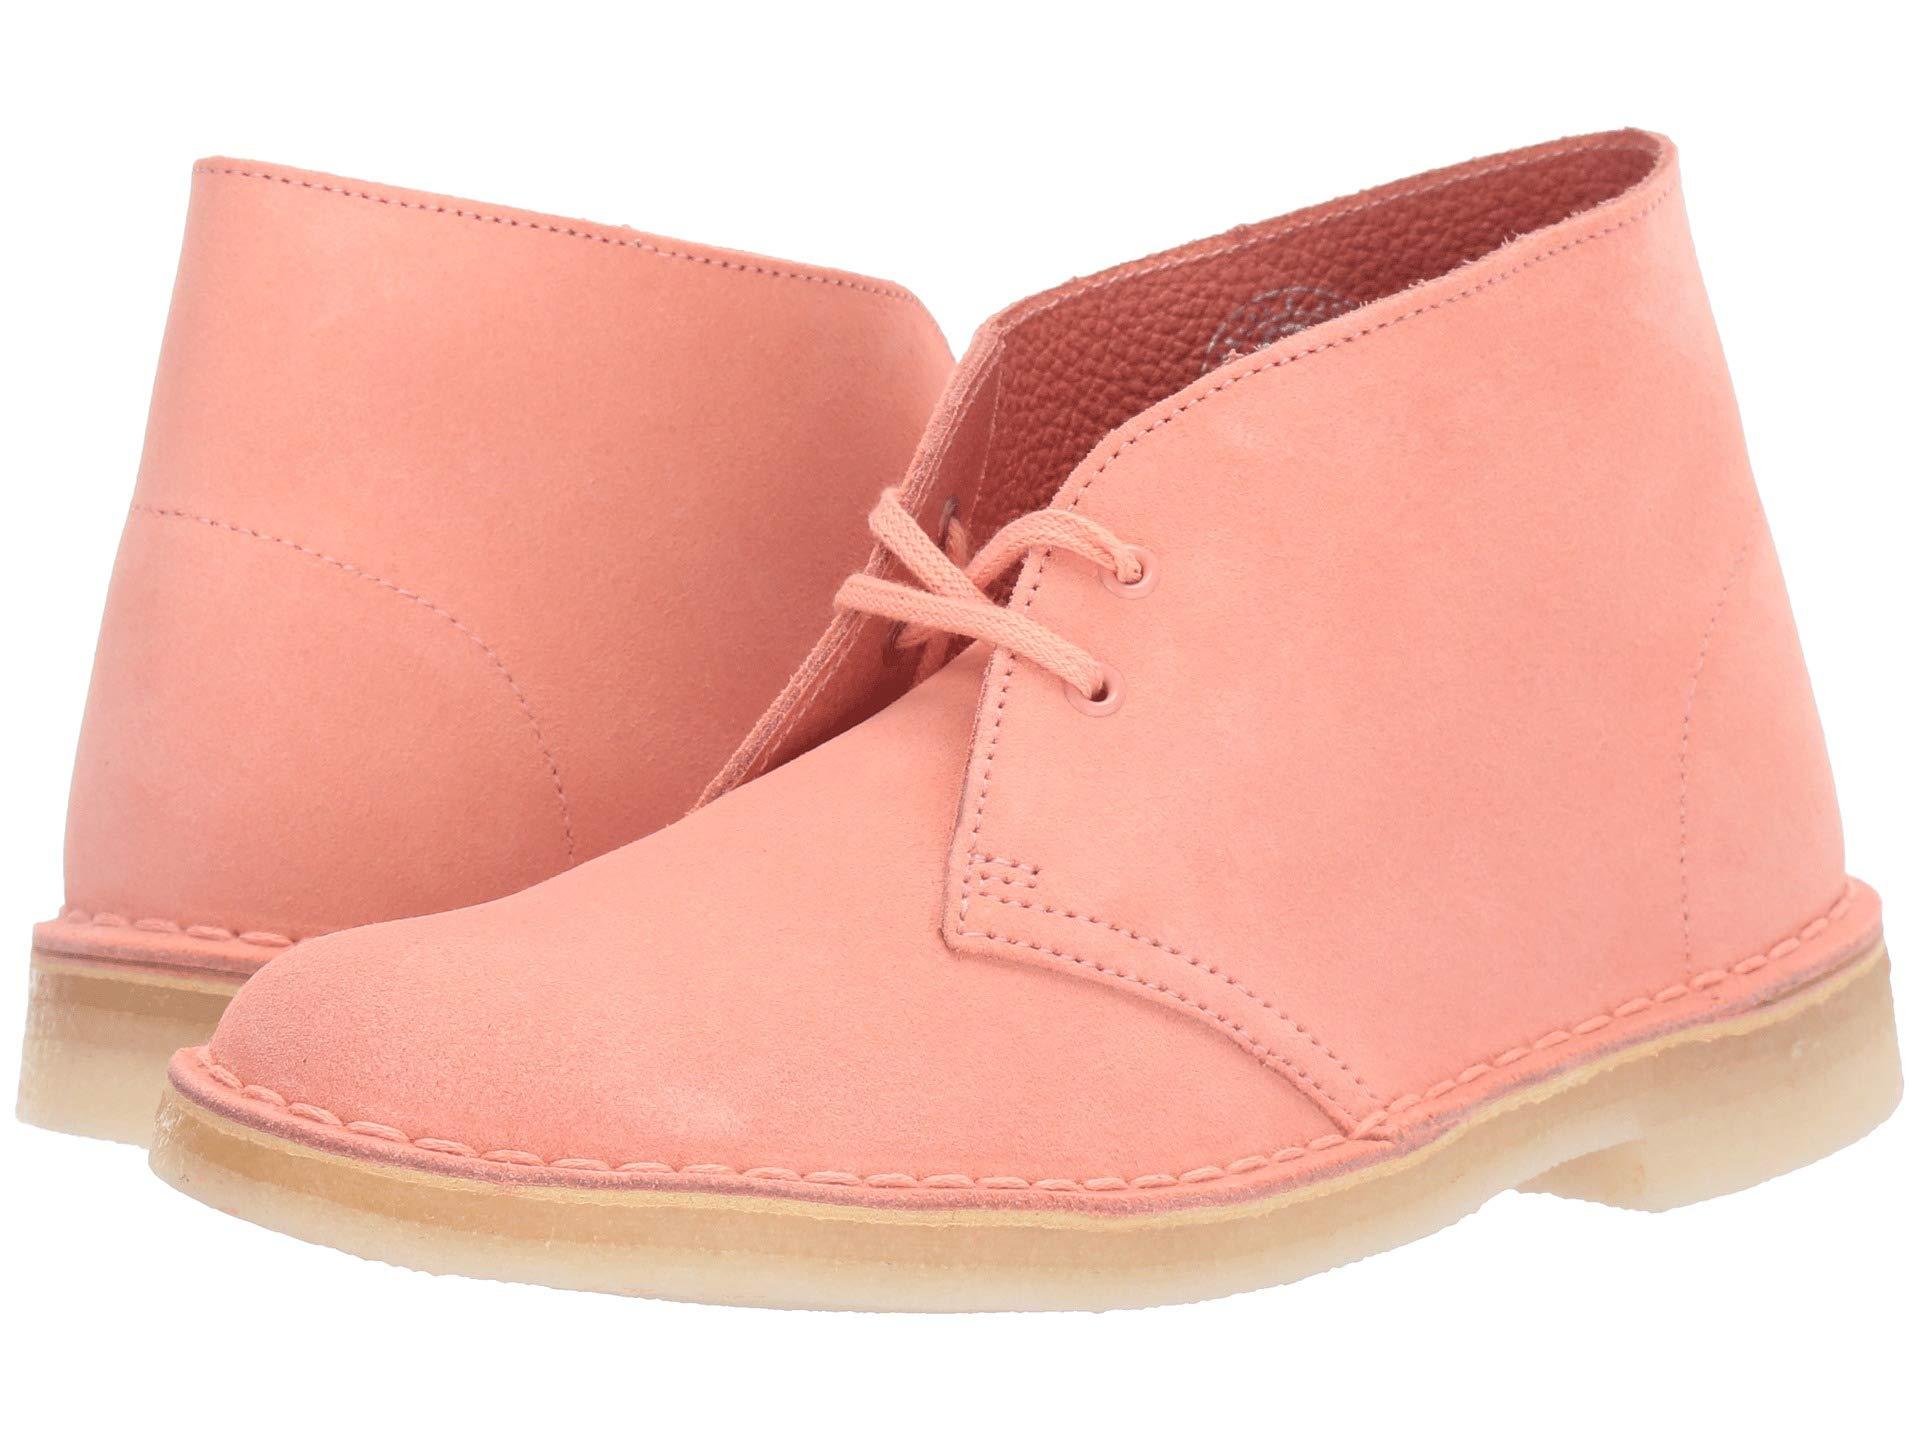 Clarks Suede Desert Boot Ankle Bootie in Coral Suede (Pink) - Lyst